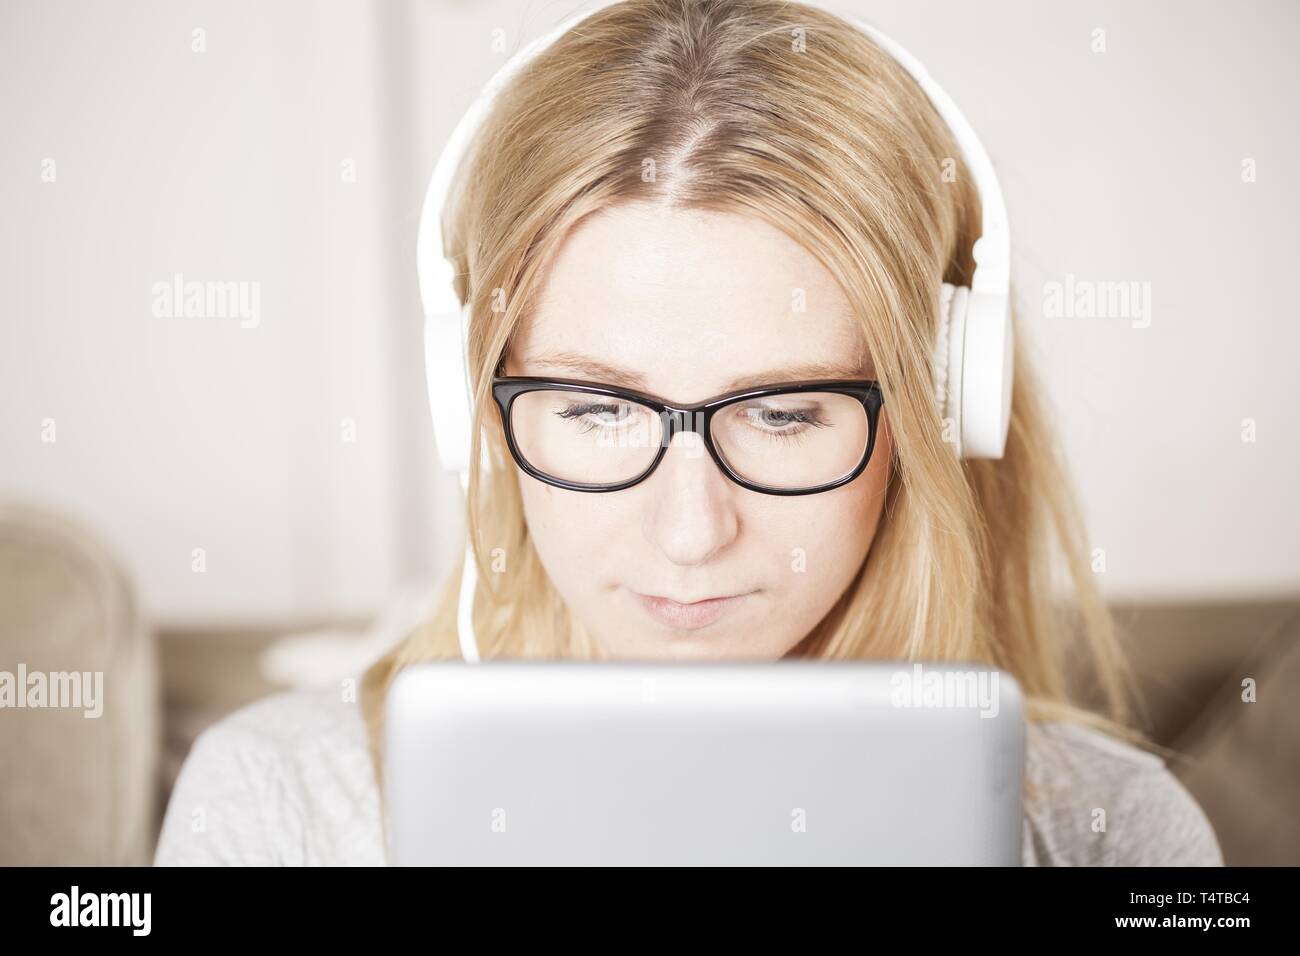 Blond young woman with headphones and tablet PC Stock Photo